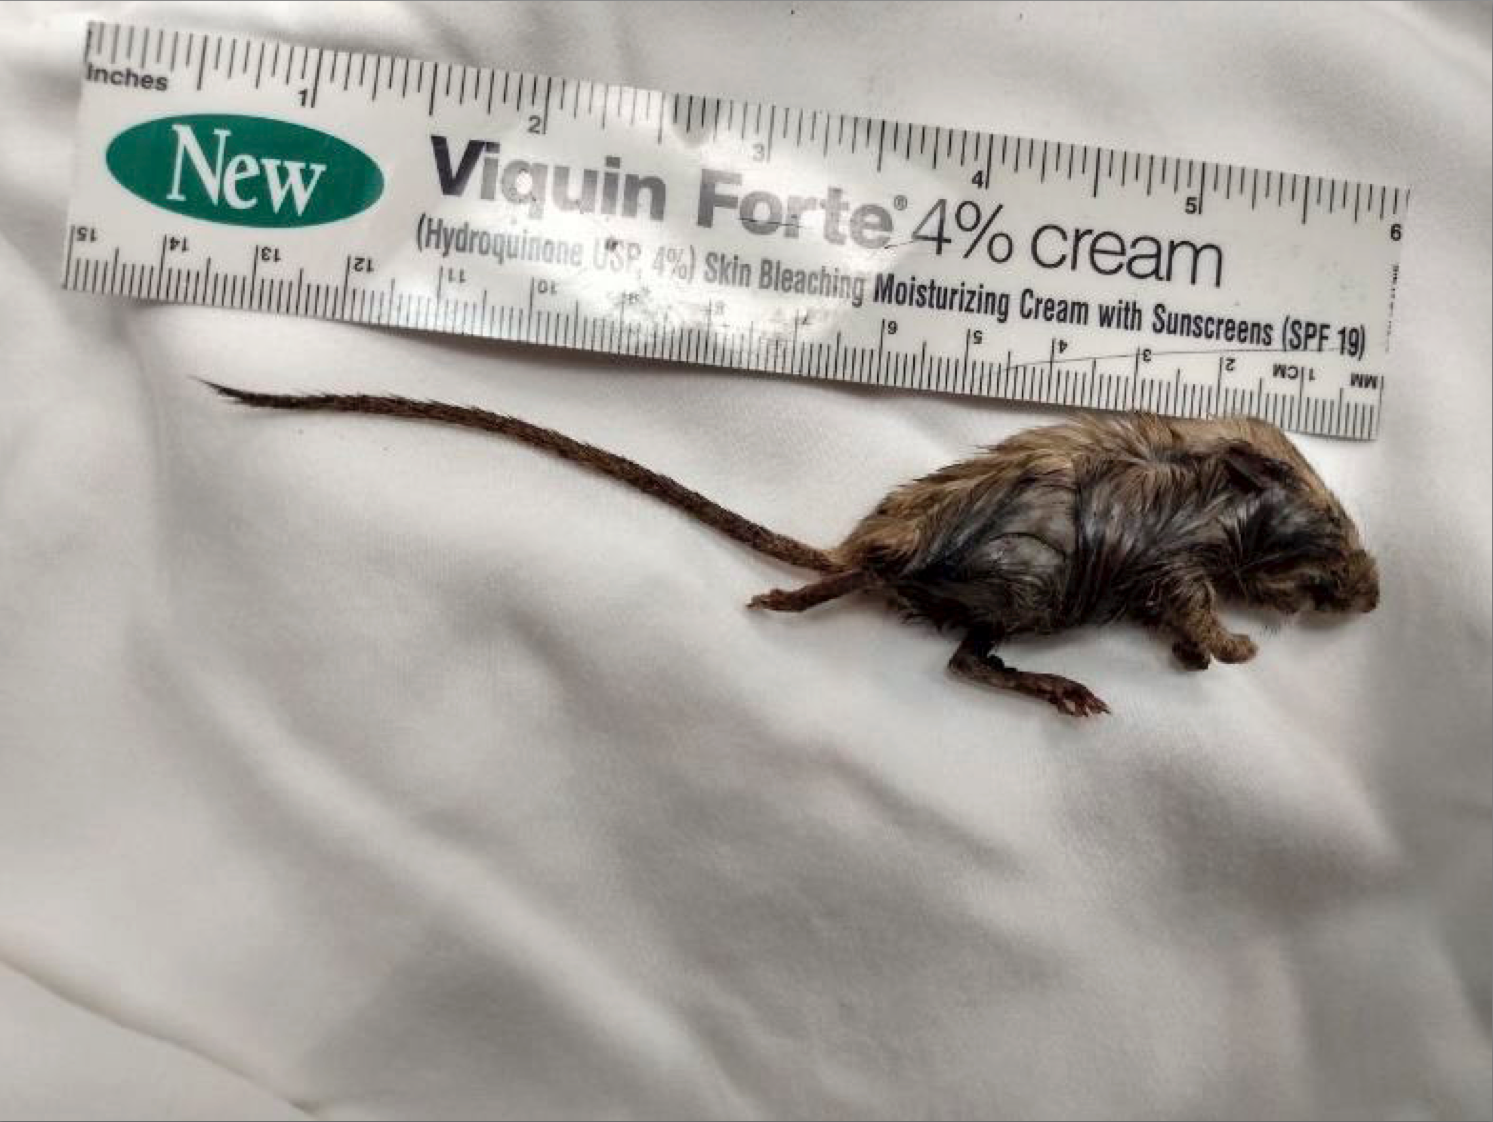 A dead and oiled Western harvest mouse found by the GS-5 surface expression near McKittrick, California.